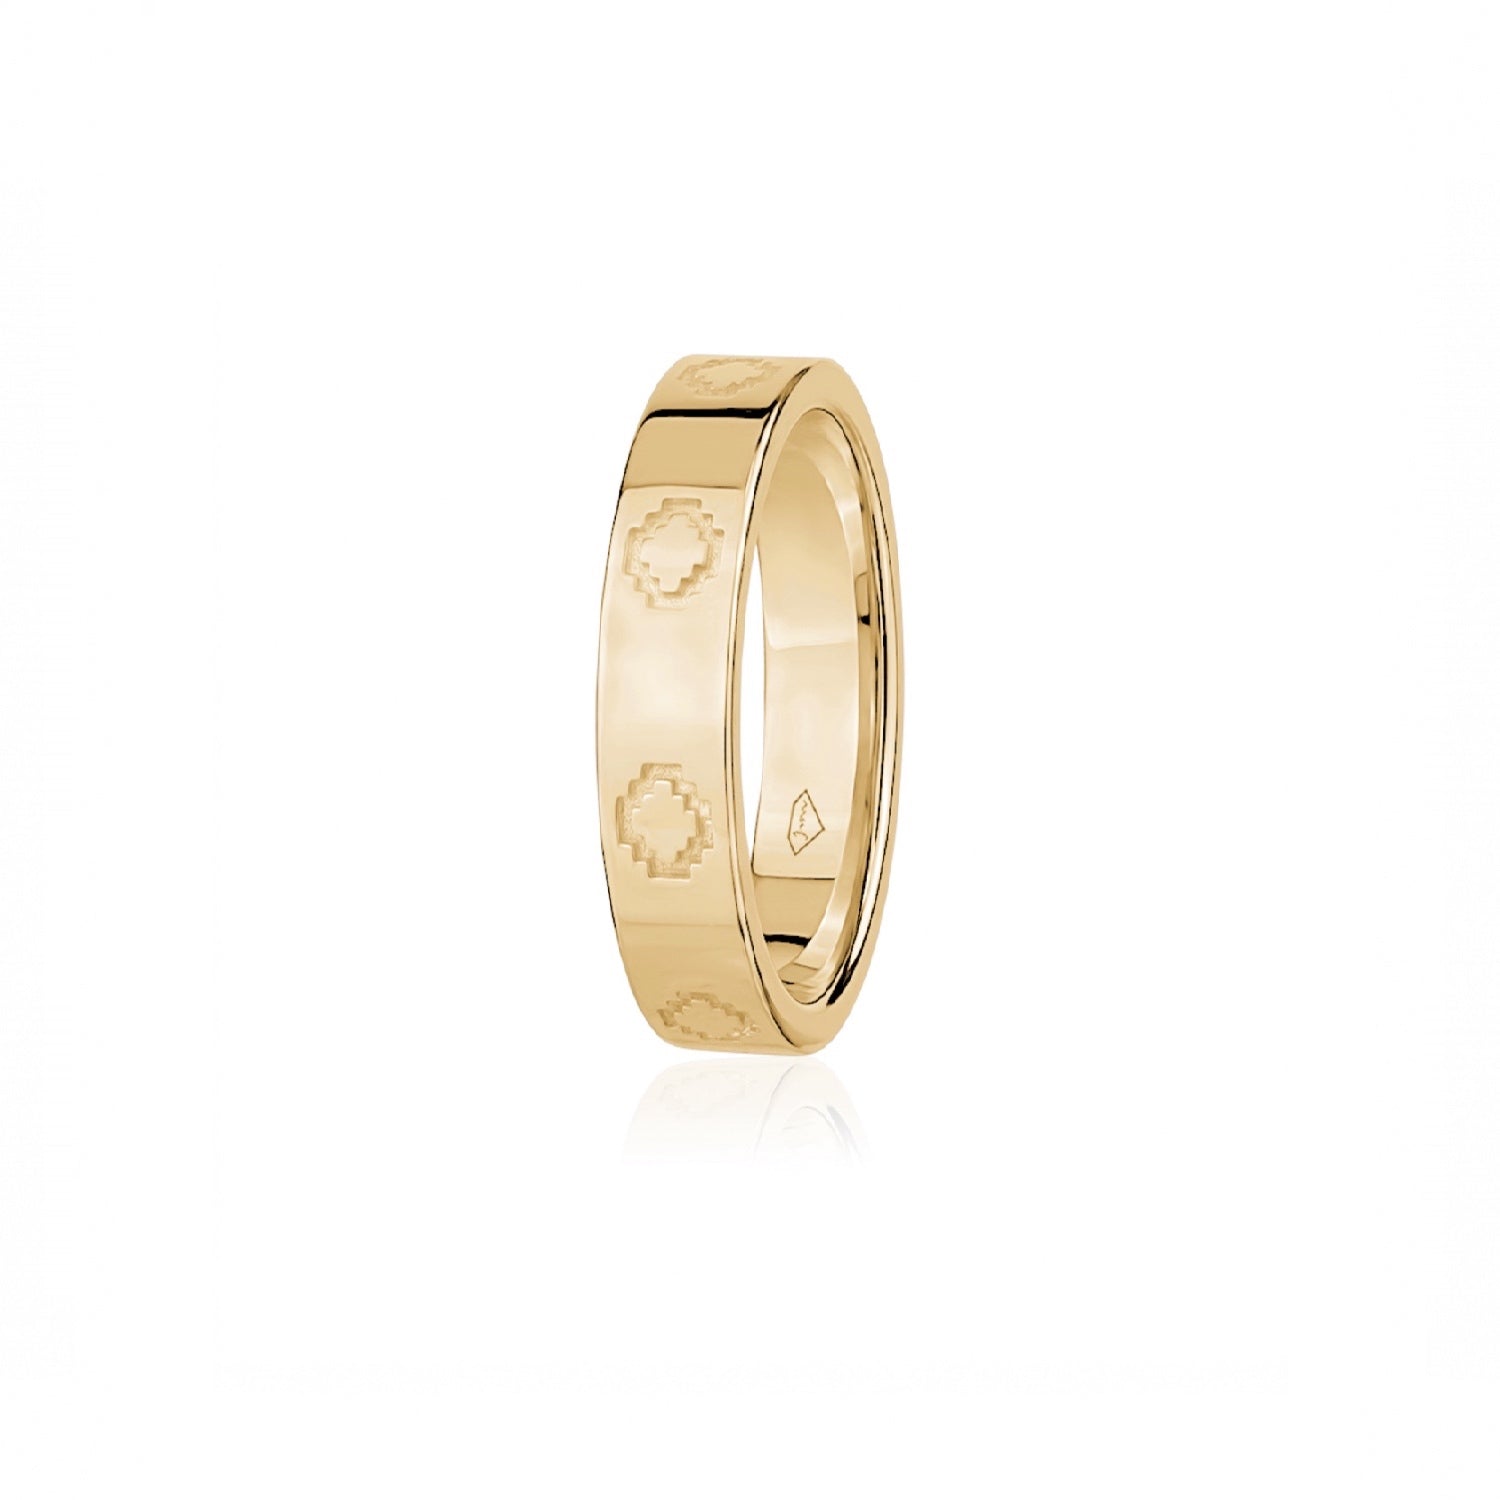 Step Motif Polished Finish Square Edge 5 mm Wedding Band in Yellow Gold